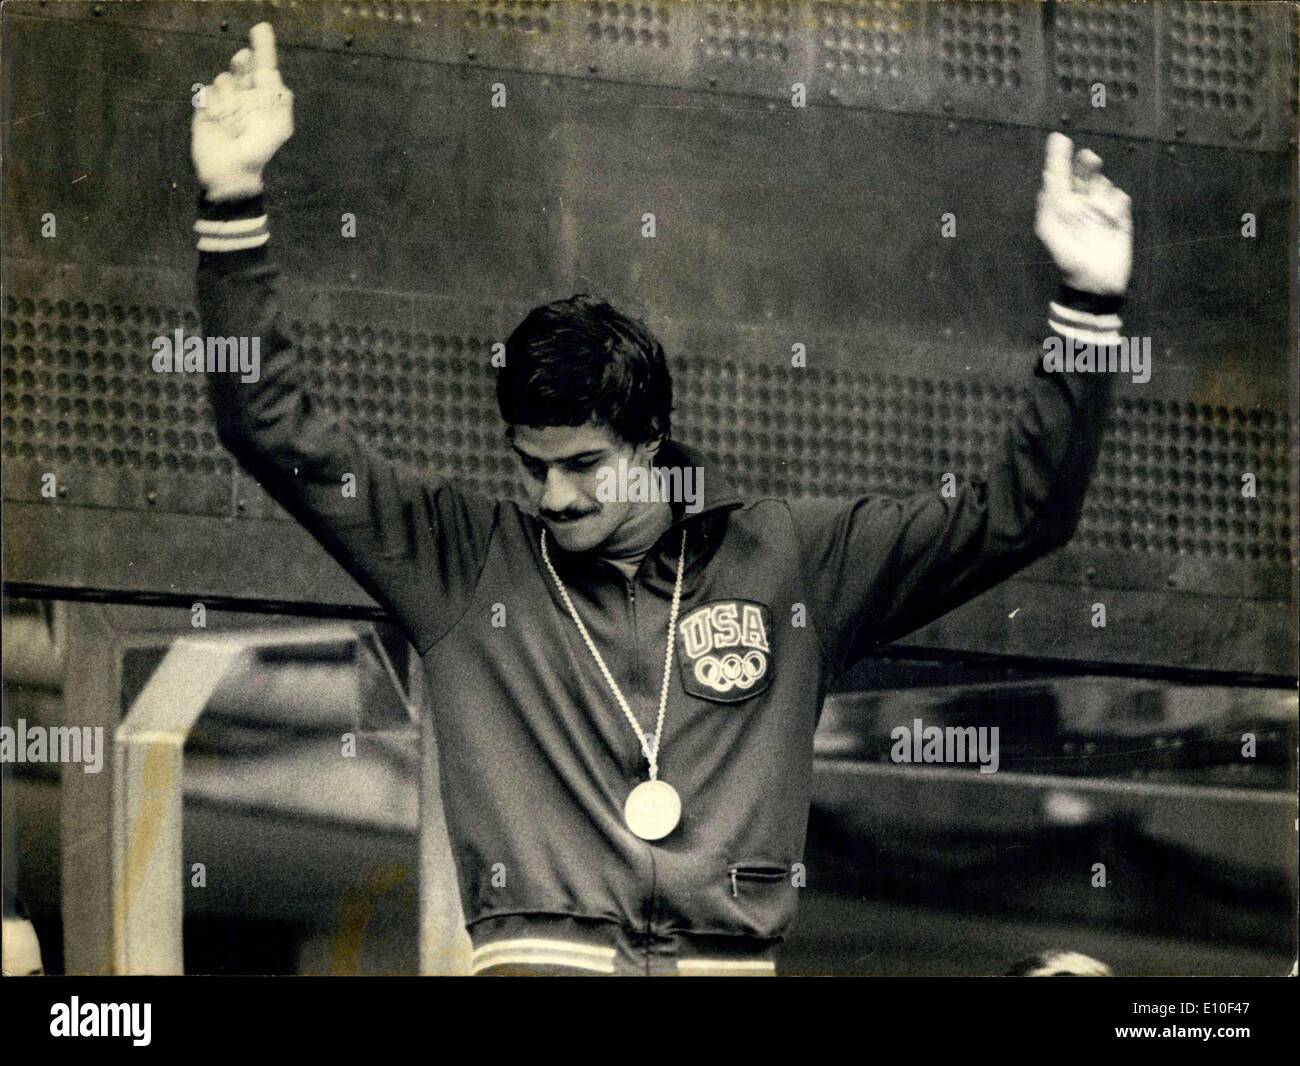 Aug. 29, 1972 - Mark Spitz Wins Gold in 200m Butterfly at Munich Olympics Stock Photo